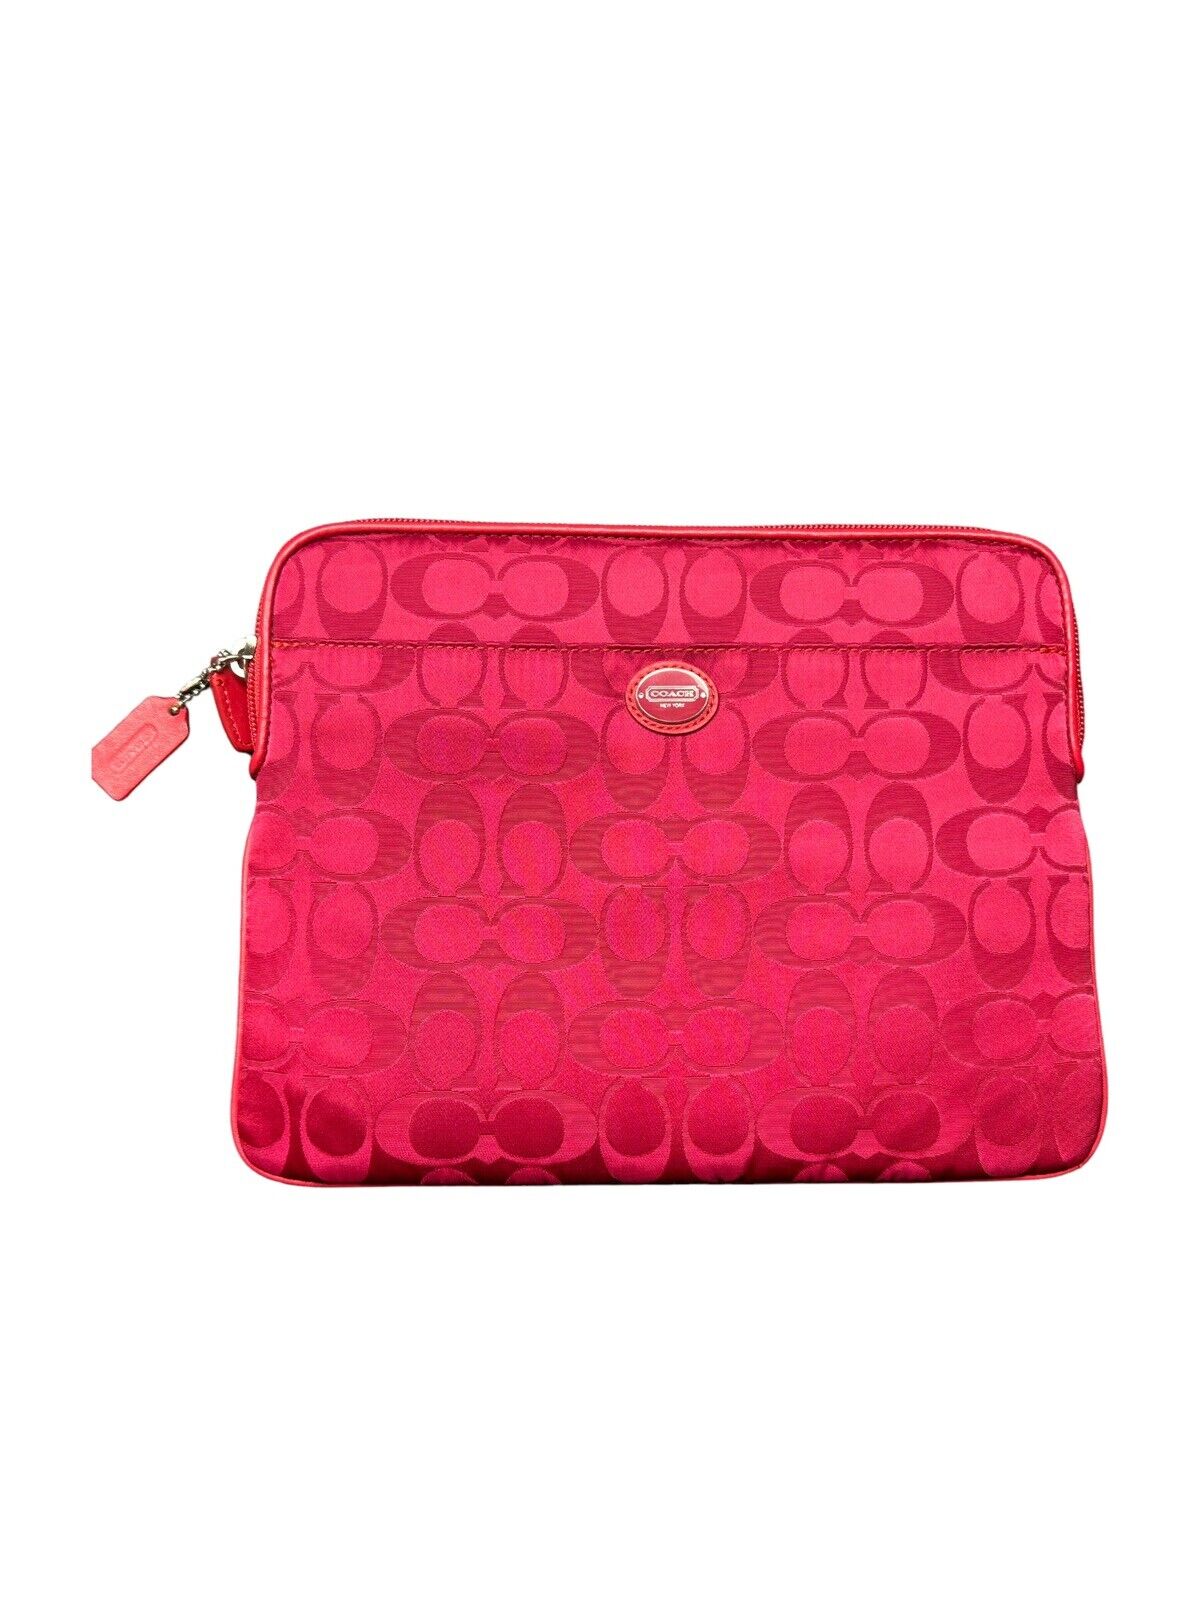 COACH New York Signature iPad Sleeve Tablet Cover Case Red